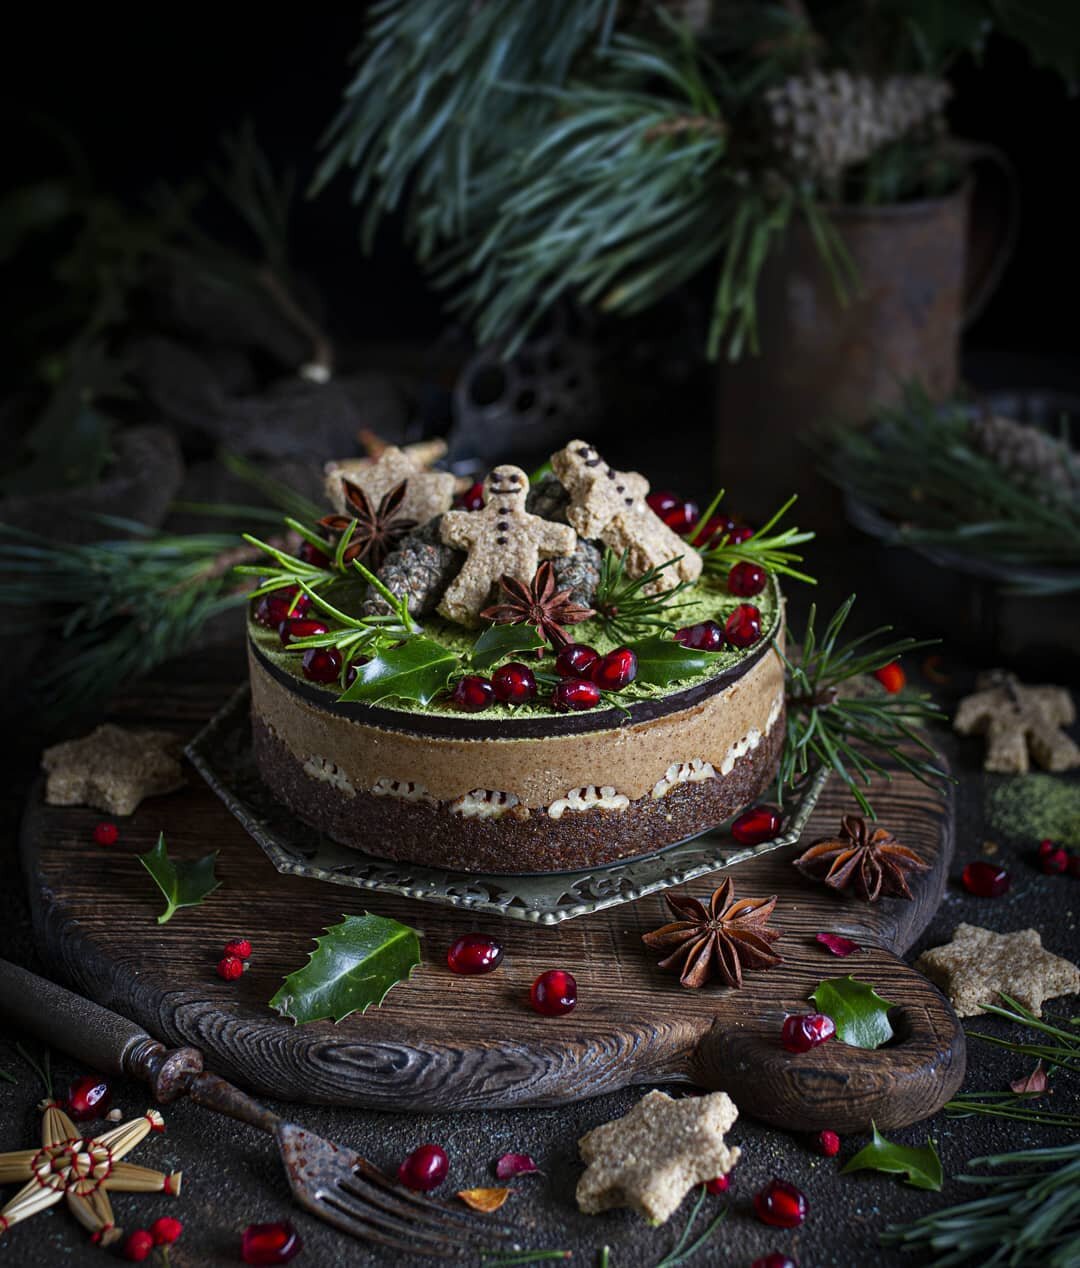 Did you recognise the cake from my yesterday's post was the cake from the book cover? It is one of my life-long favourite recipes. I tweak it a bit to make a Christmas-y version this time. I added 2 tsp of chai spice into the base and 1 tsp of ginger